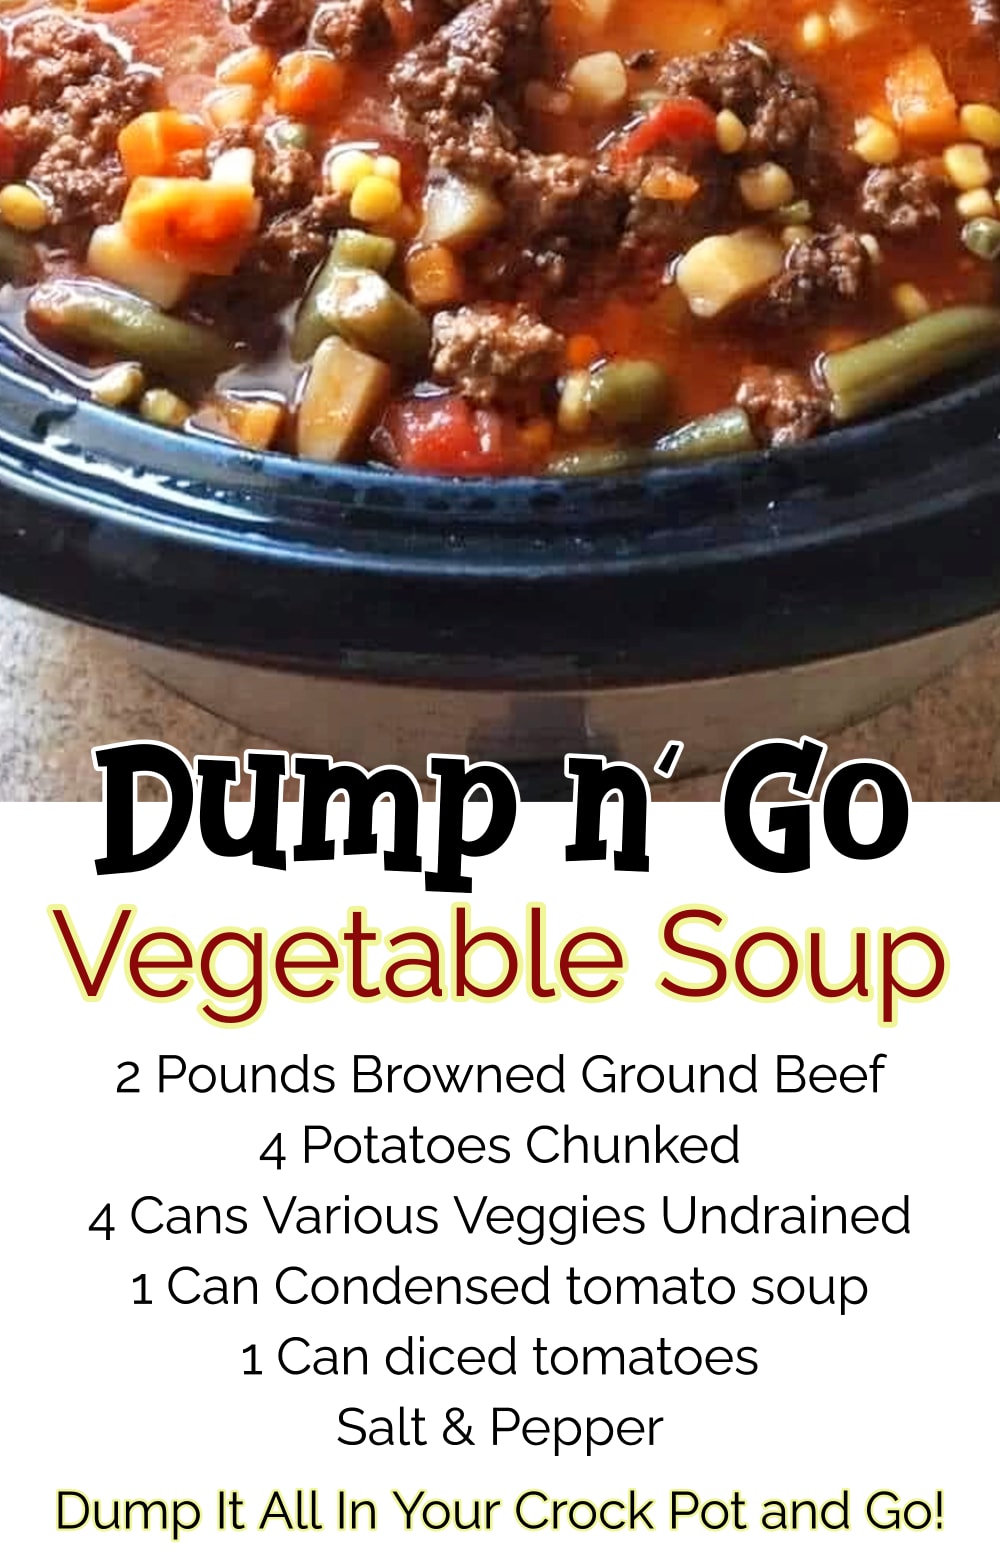 Easy Soup Recipes with Ingredients and Procedure - this easy vegetable soup recipe has few ingredients - just dump and go to cook on your crock pot slow cooker